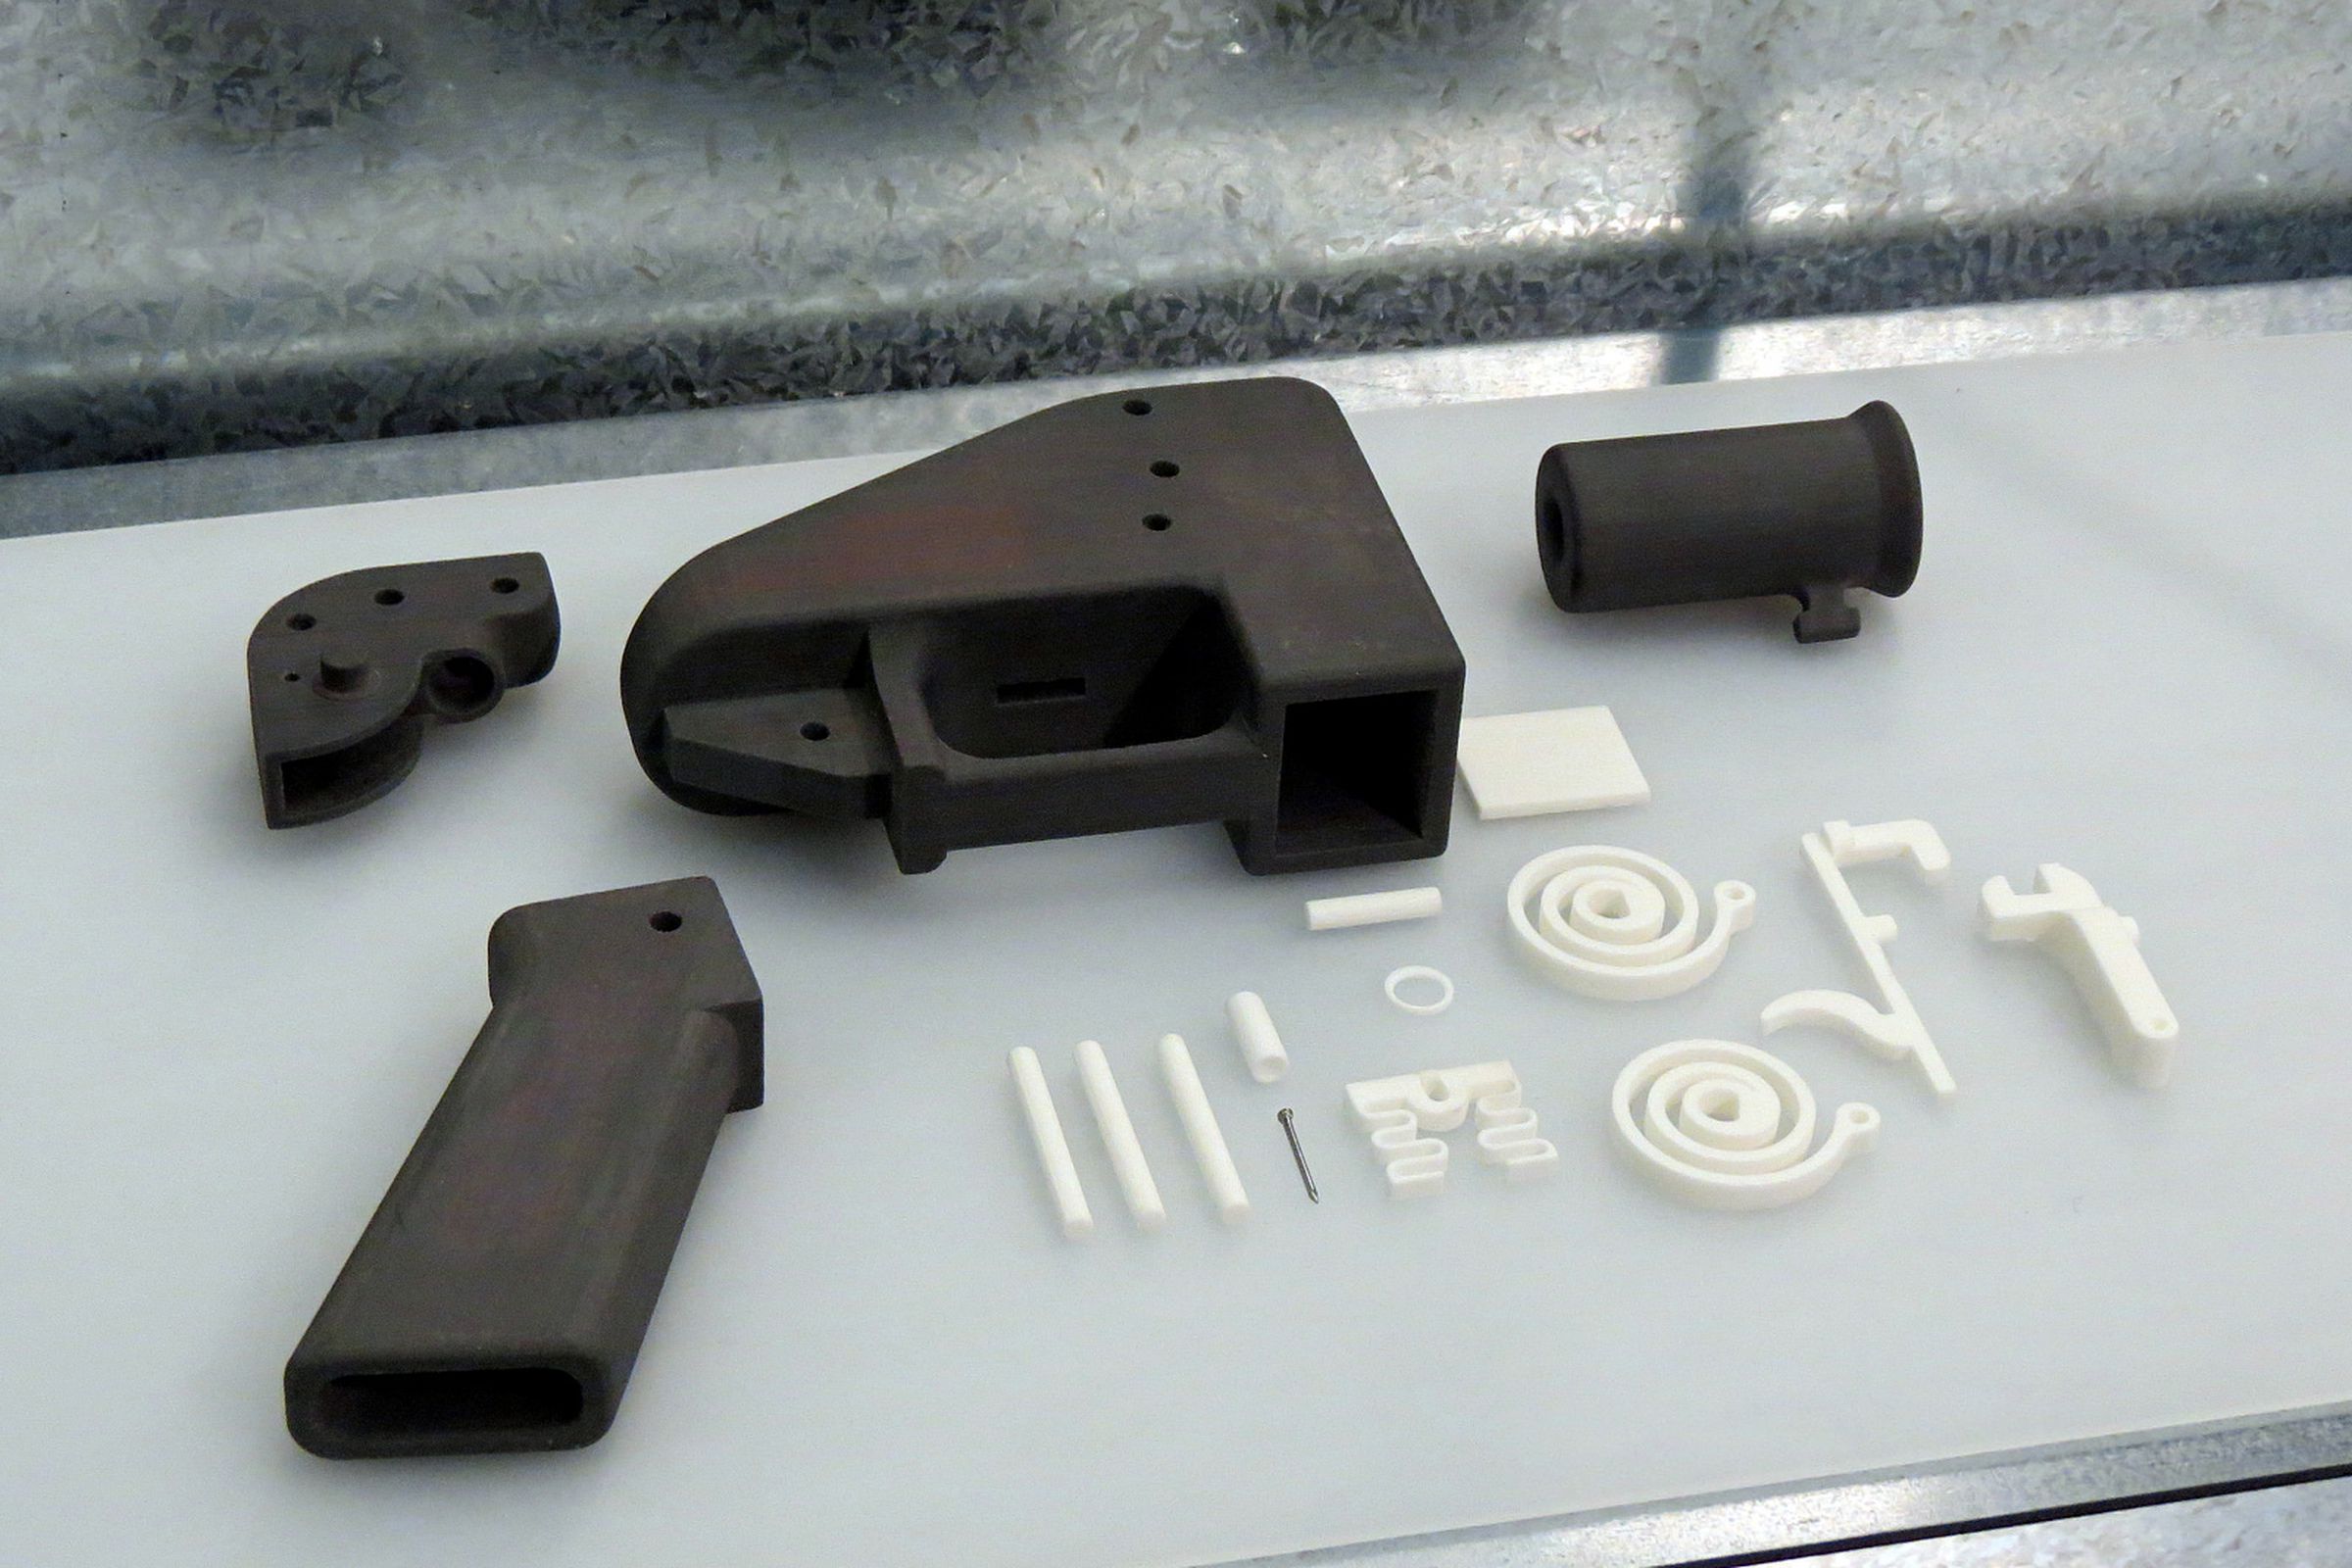 Photo of The Liberator, the world's first 3D-printed gun